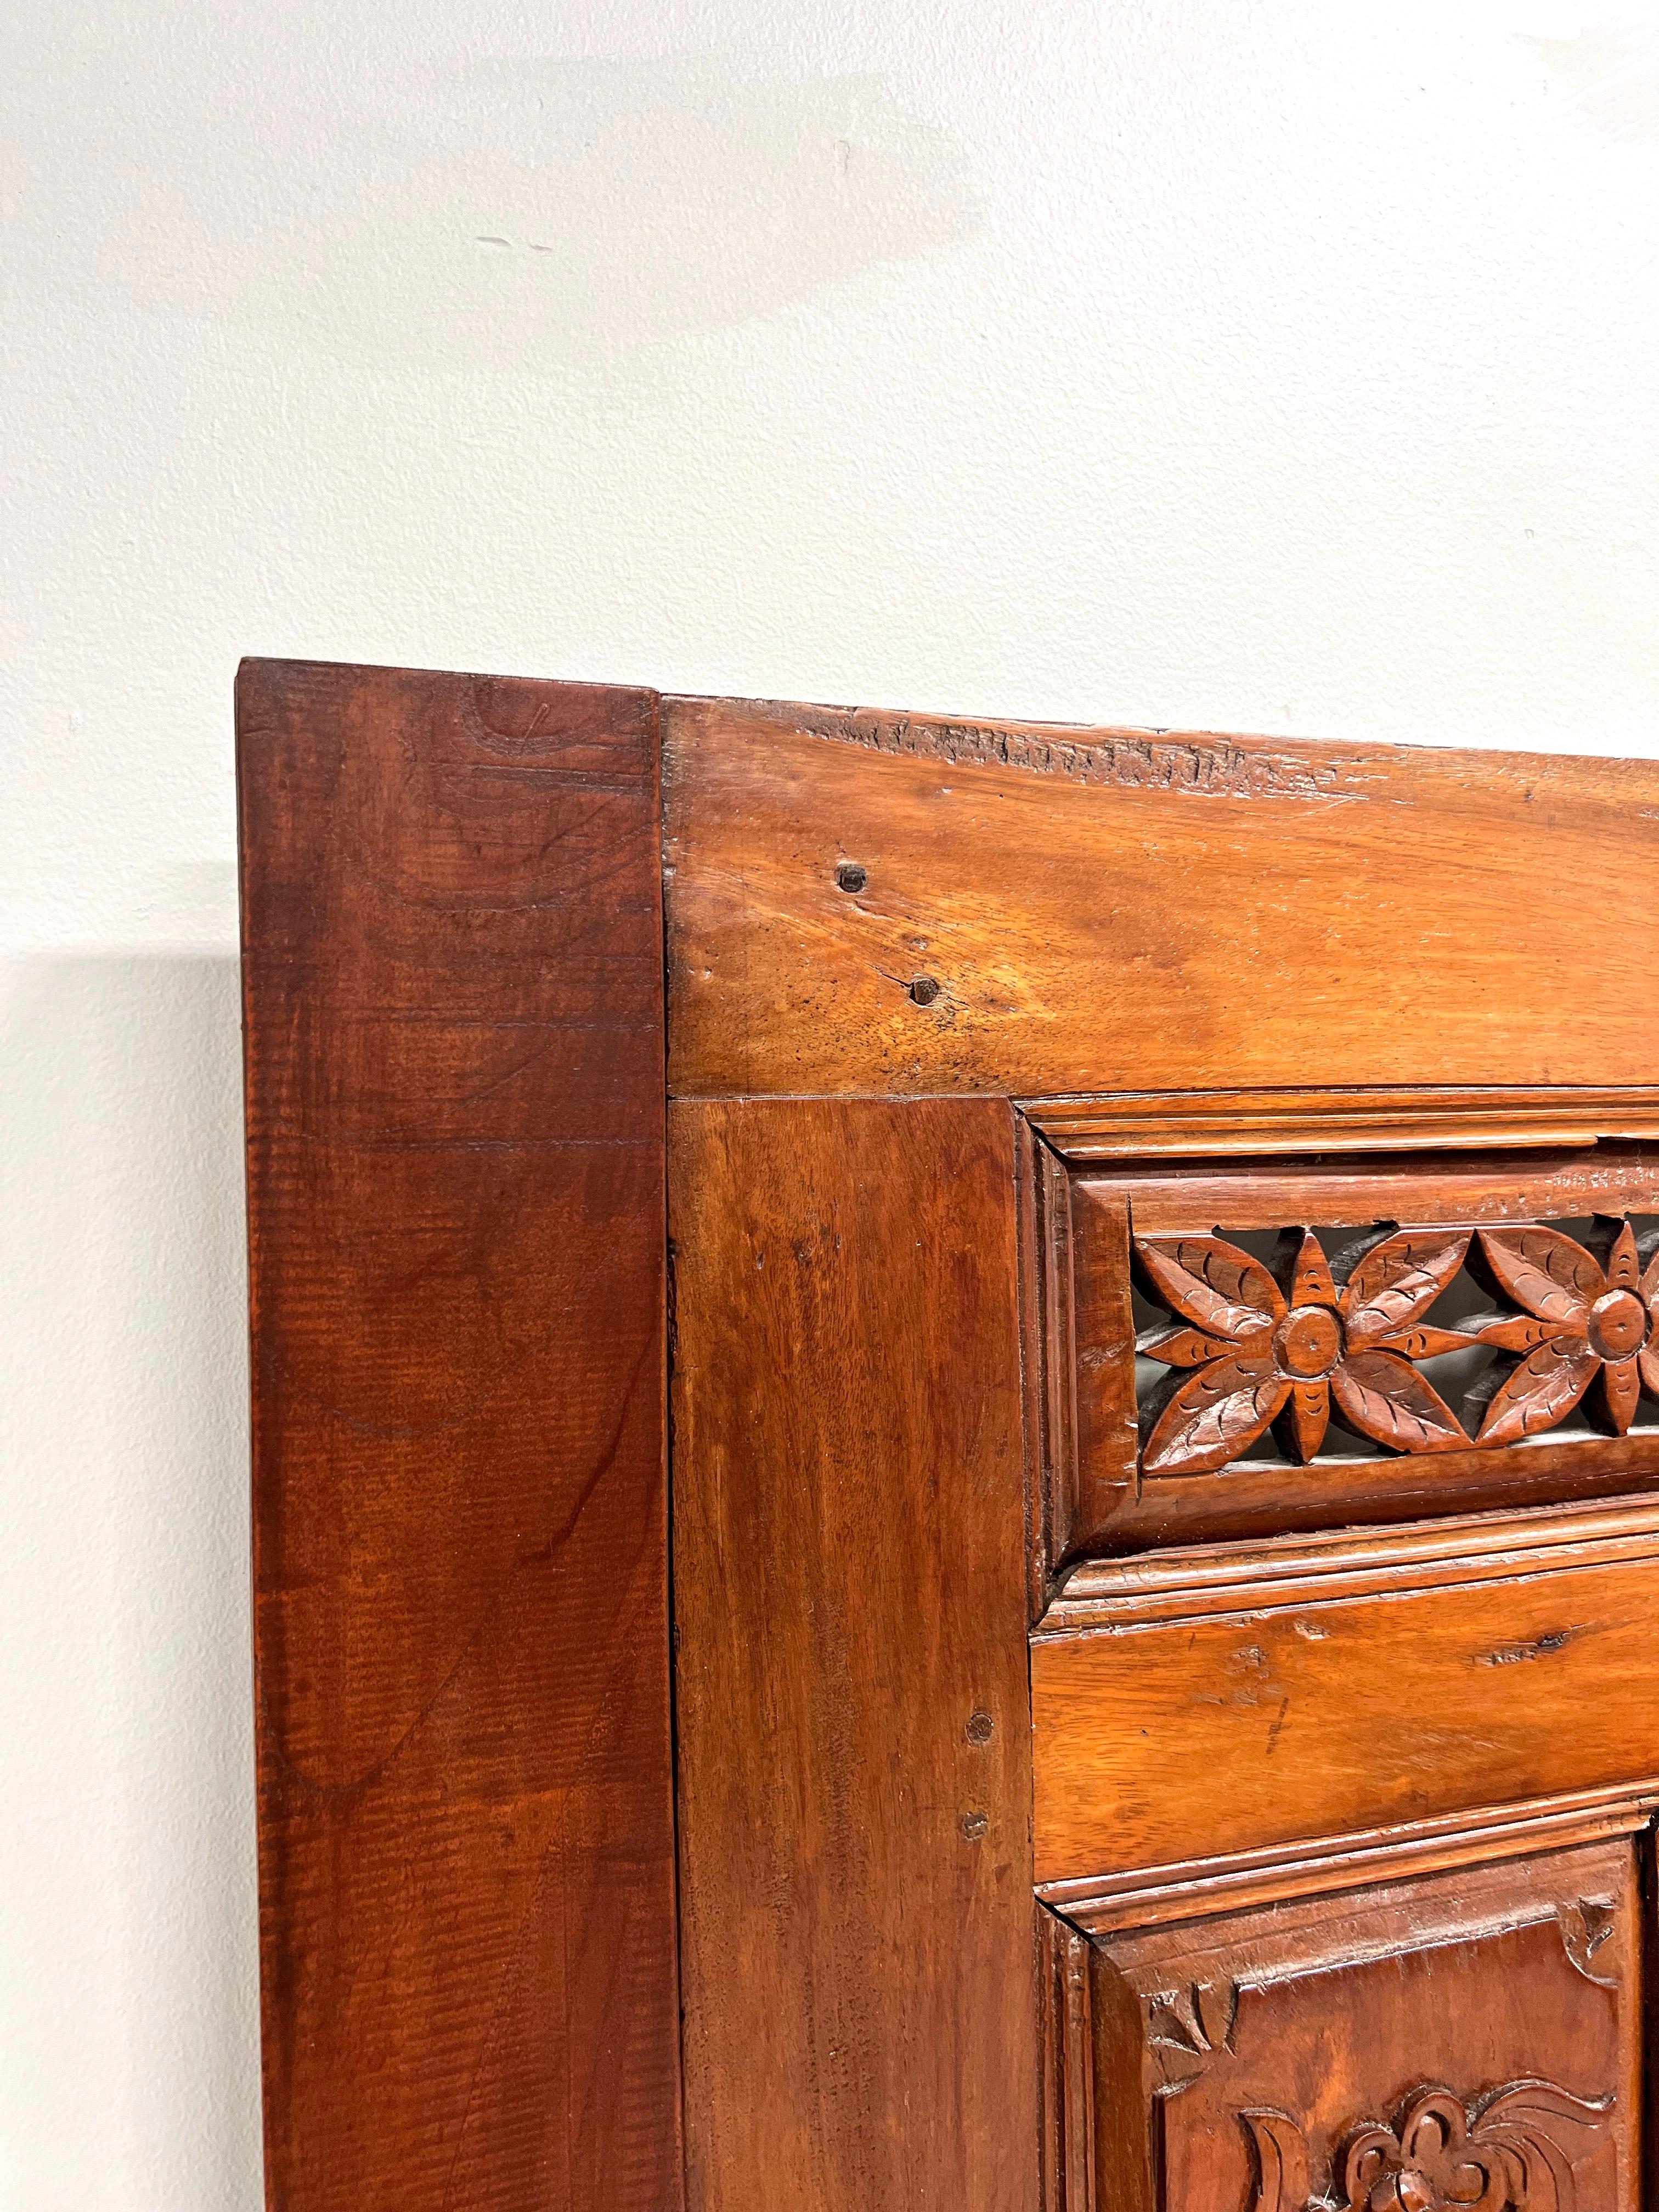 Chinoiserie 20th Century Carved Balinese Mahogany Doors Converted to Headboards - Pair For Sale